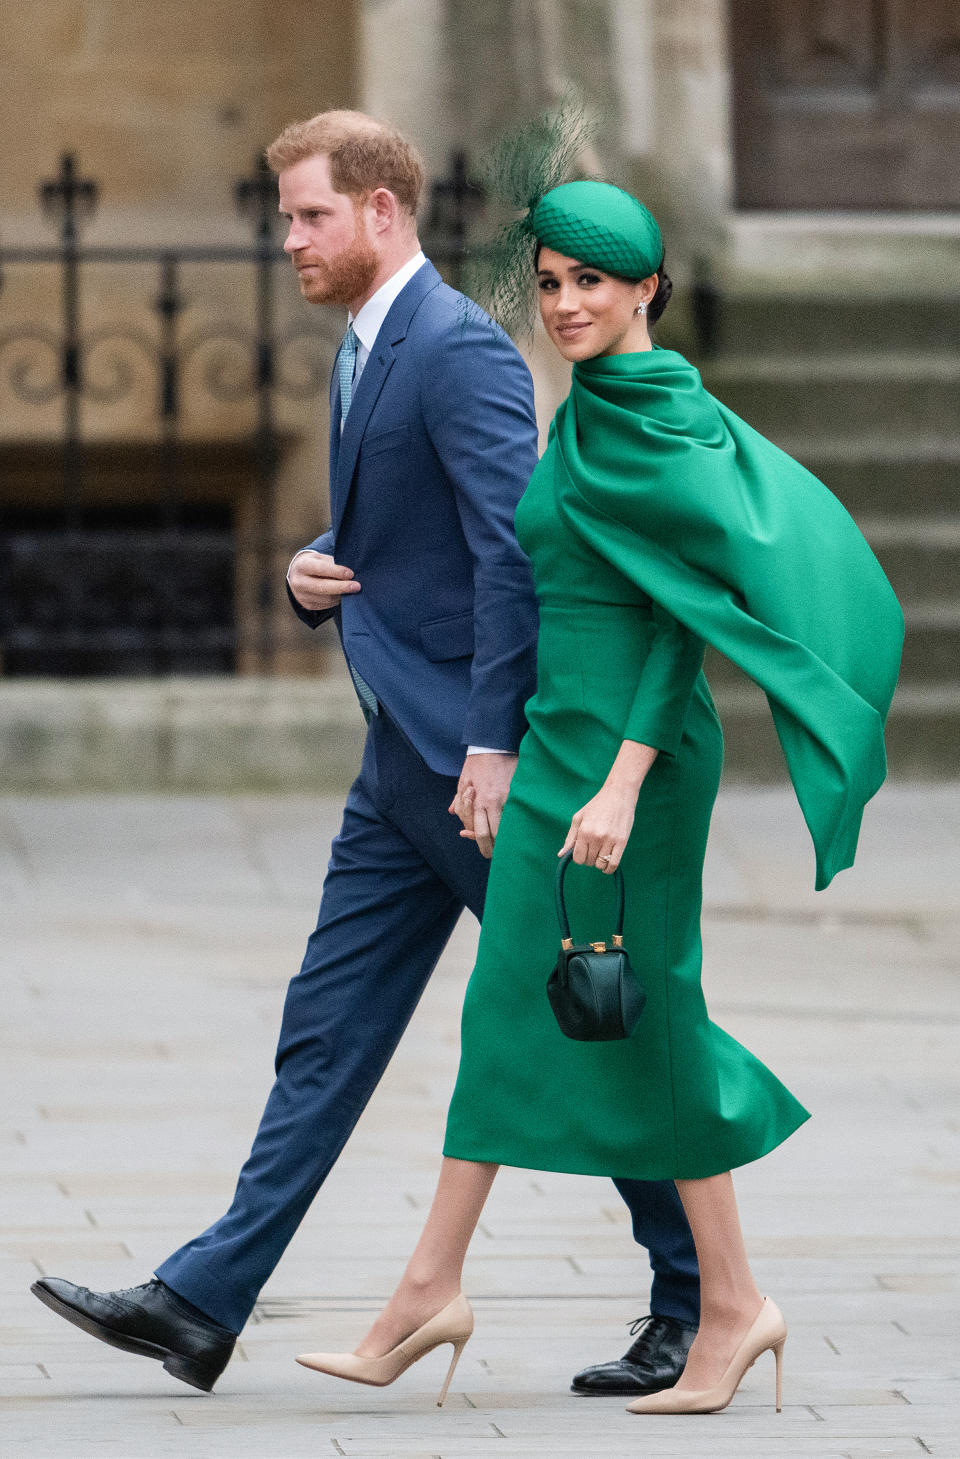 Prince Harry and Meghan Markle at the Commonwealth Day Service on 9 March 2020